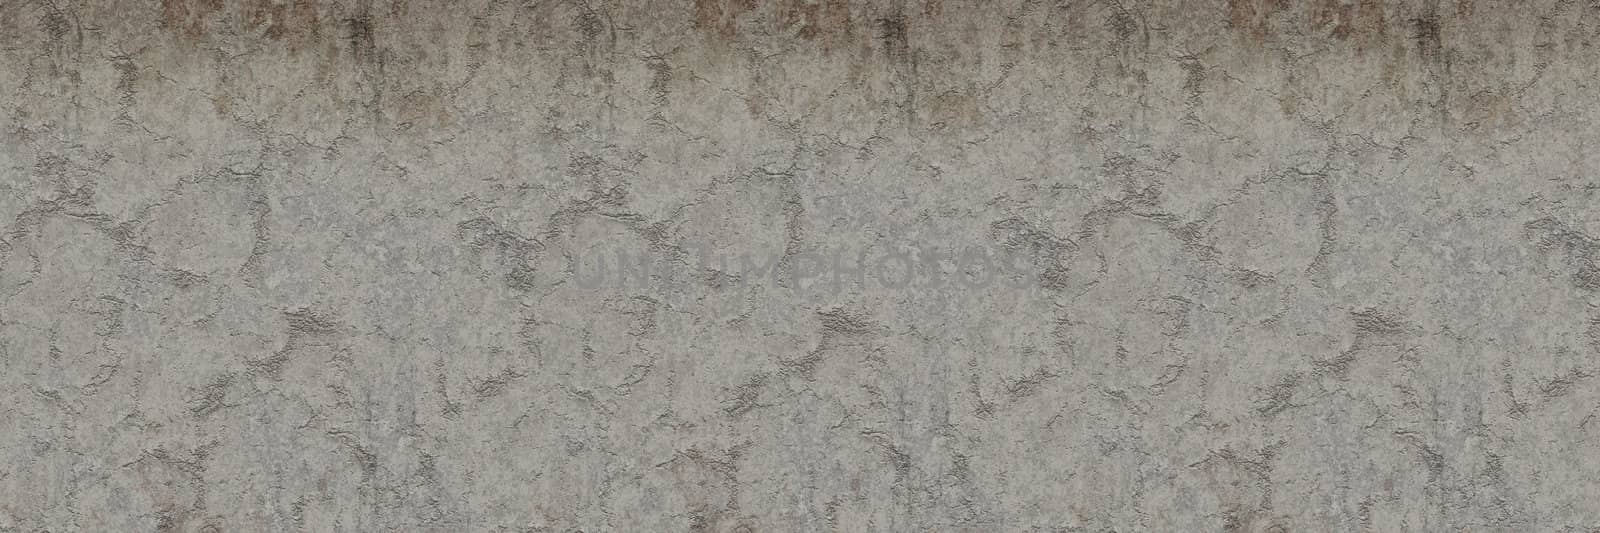 Realistic Panoramic Cement Wall Seamless Pattern